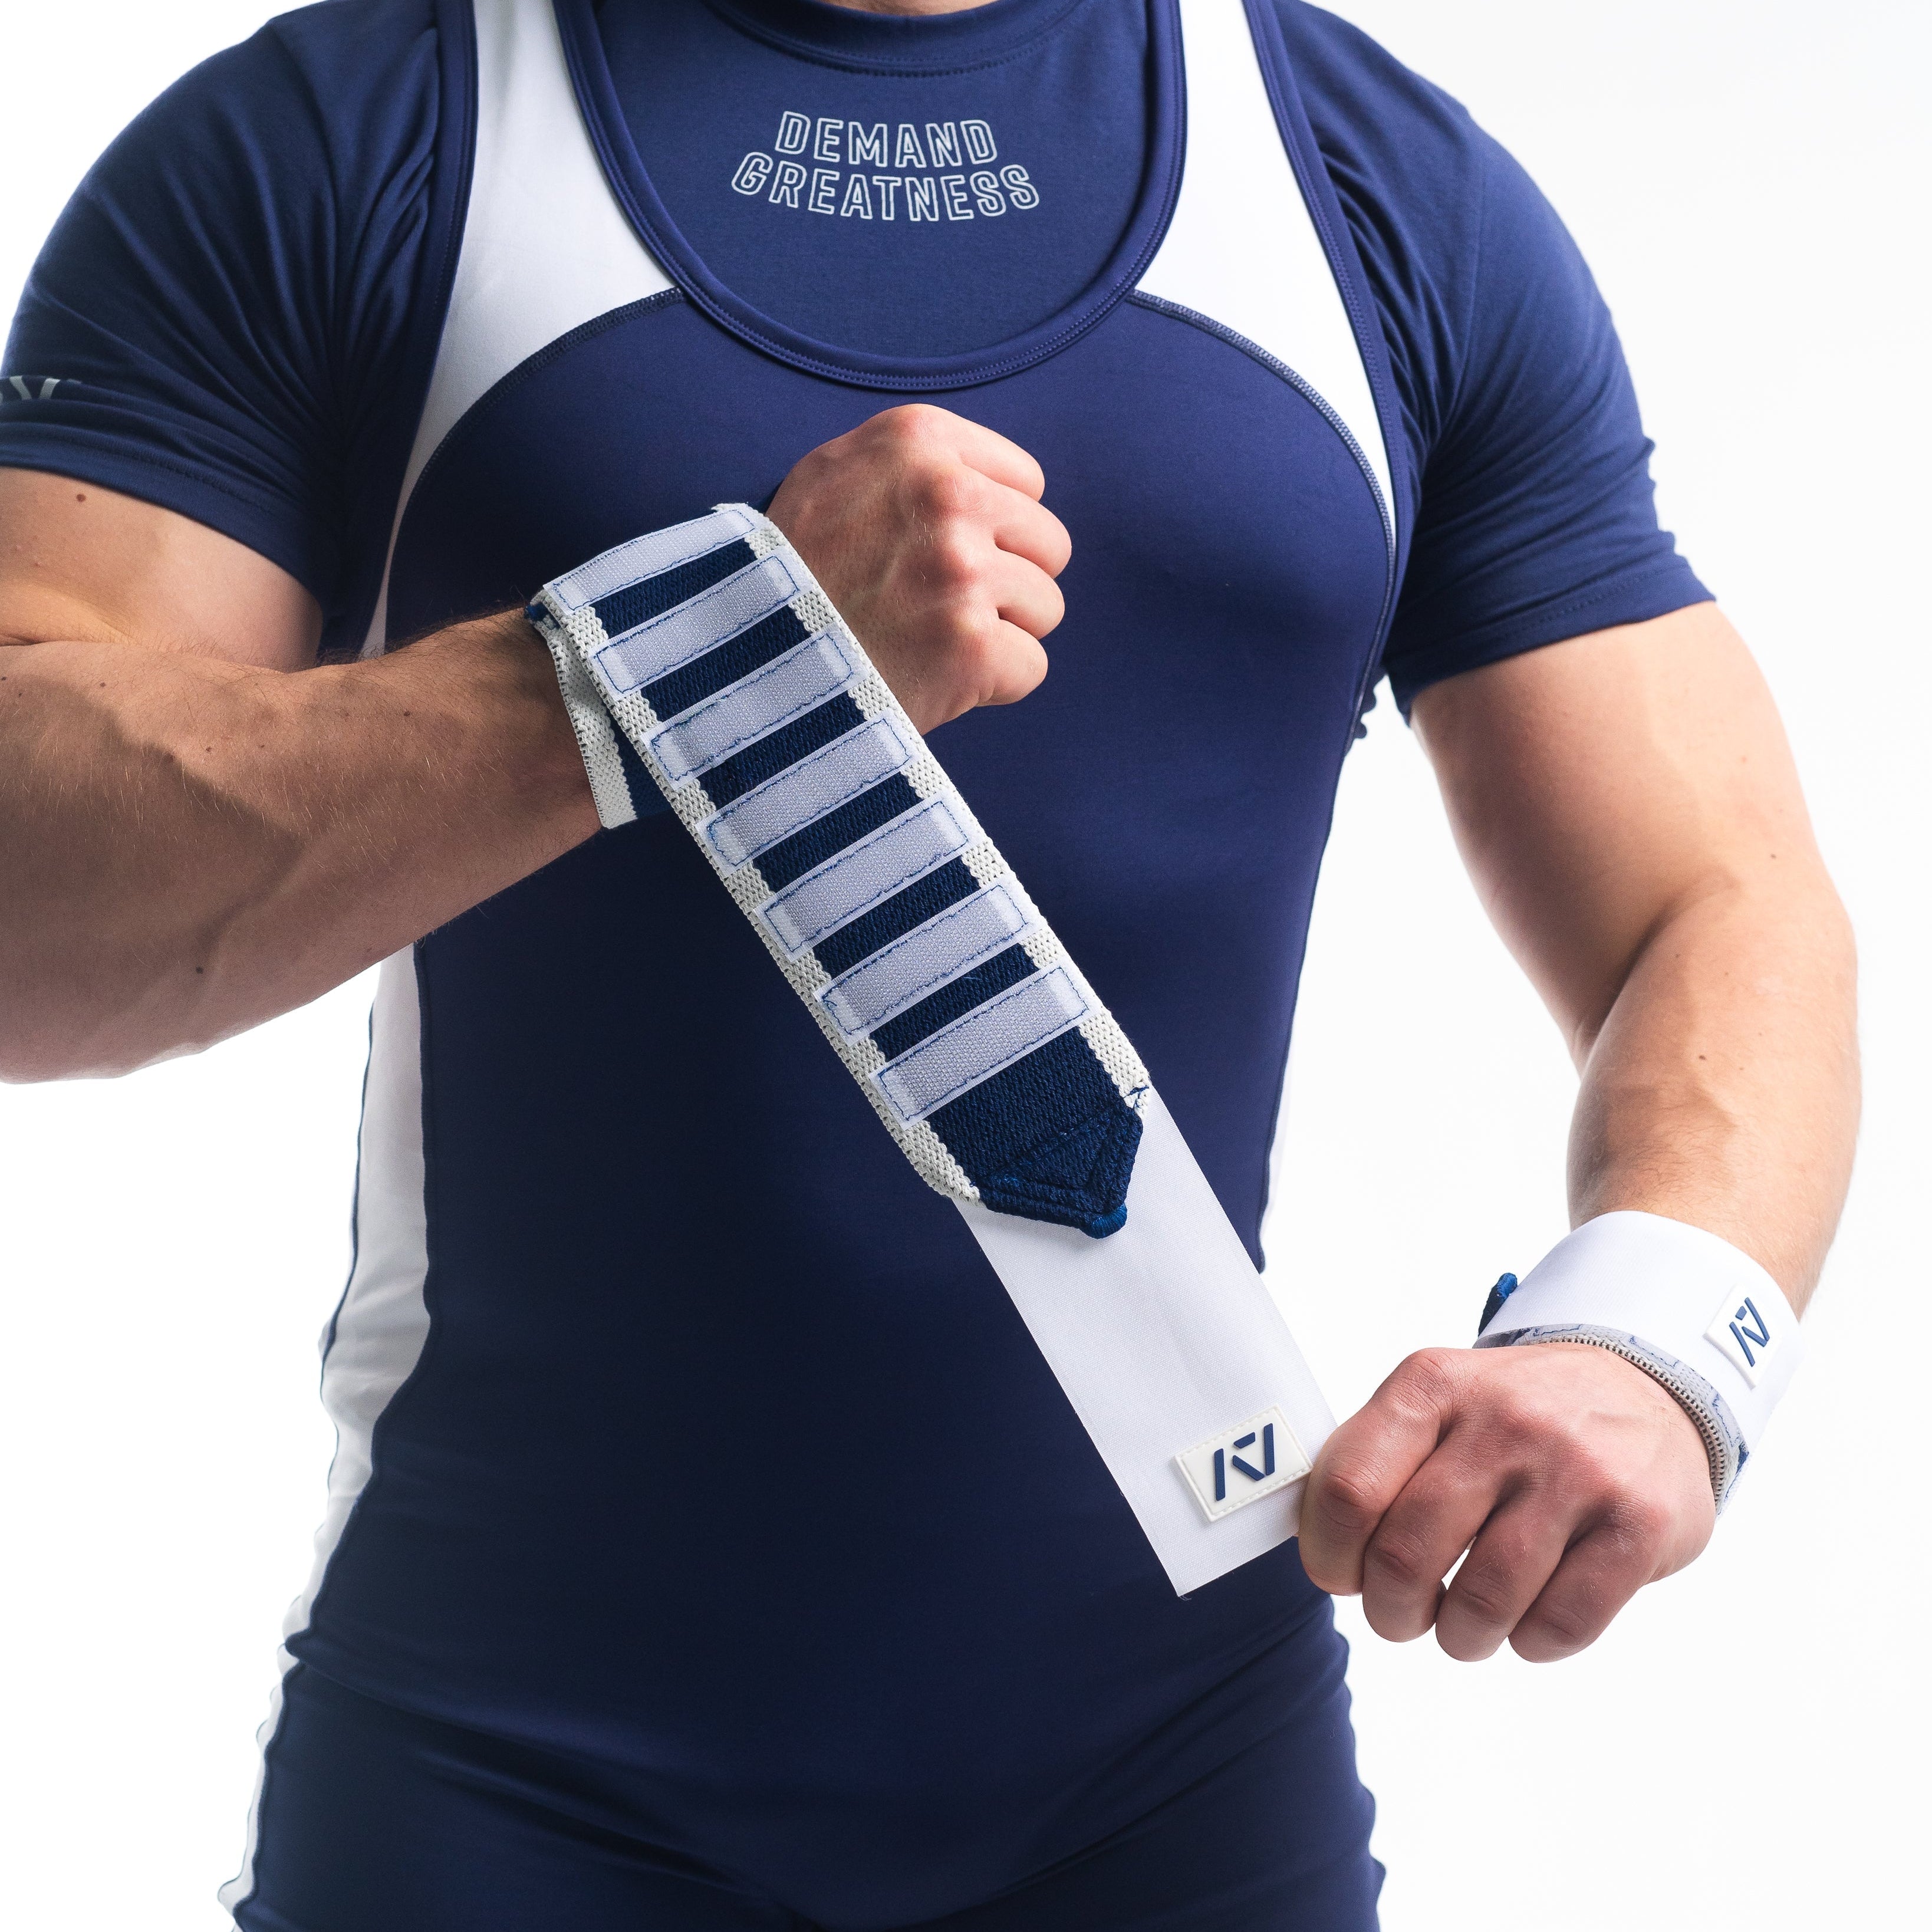 A7 IPF Approved Zebra Wraps feature strips of velcro on the wraps, allowing Zebra Wraps to conform fully to your unique preference of tightness. We offer Zebra wrist wraps in 3 lengths and 4 stiffnesses (Flexi, Mids, Stiff, and Rigor Mortis). The IPF Approved Kit includes Powerlifting Singlet, A7 Meet Shirt, A7 Deadlift Socks, Hourglass Knee Sleeves (Stiff Knee Sleeves and Rigor Mortis Knee Sleeves). Genouillères powerlifting shipping to France, Spain, Ireland, Germany, Italy, Sweden and EU. 